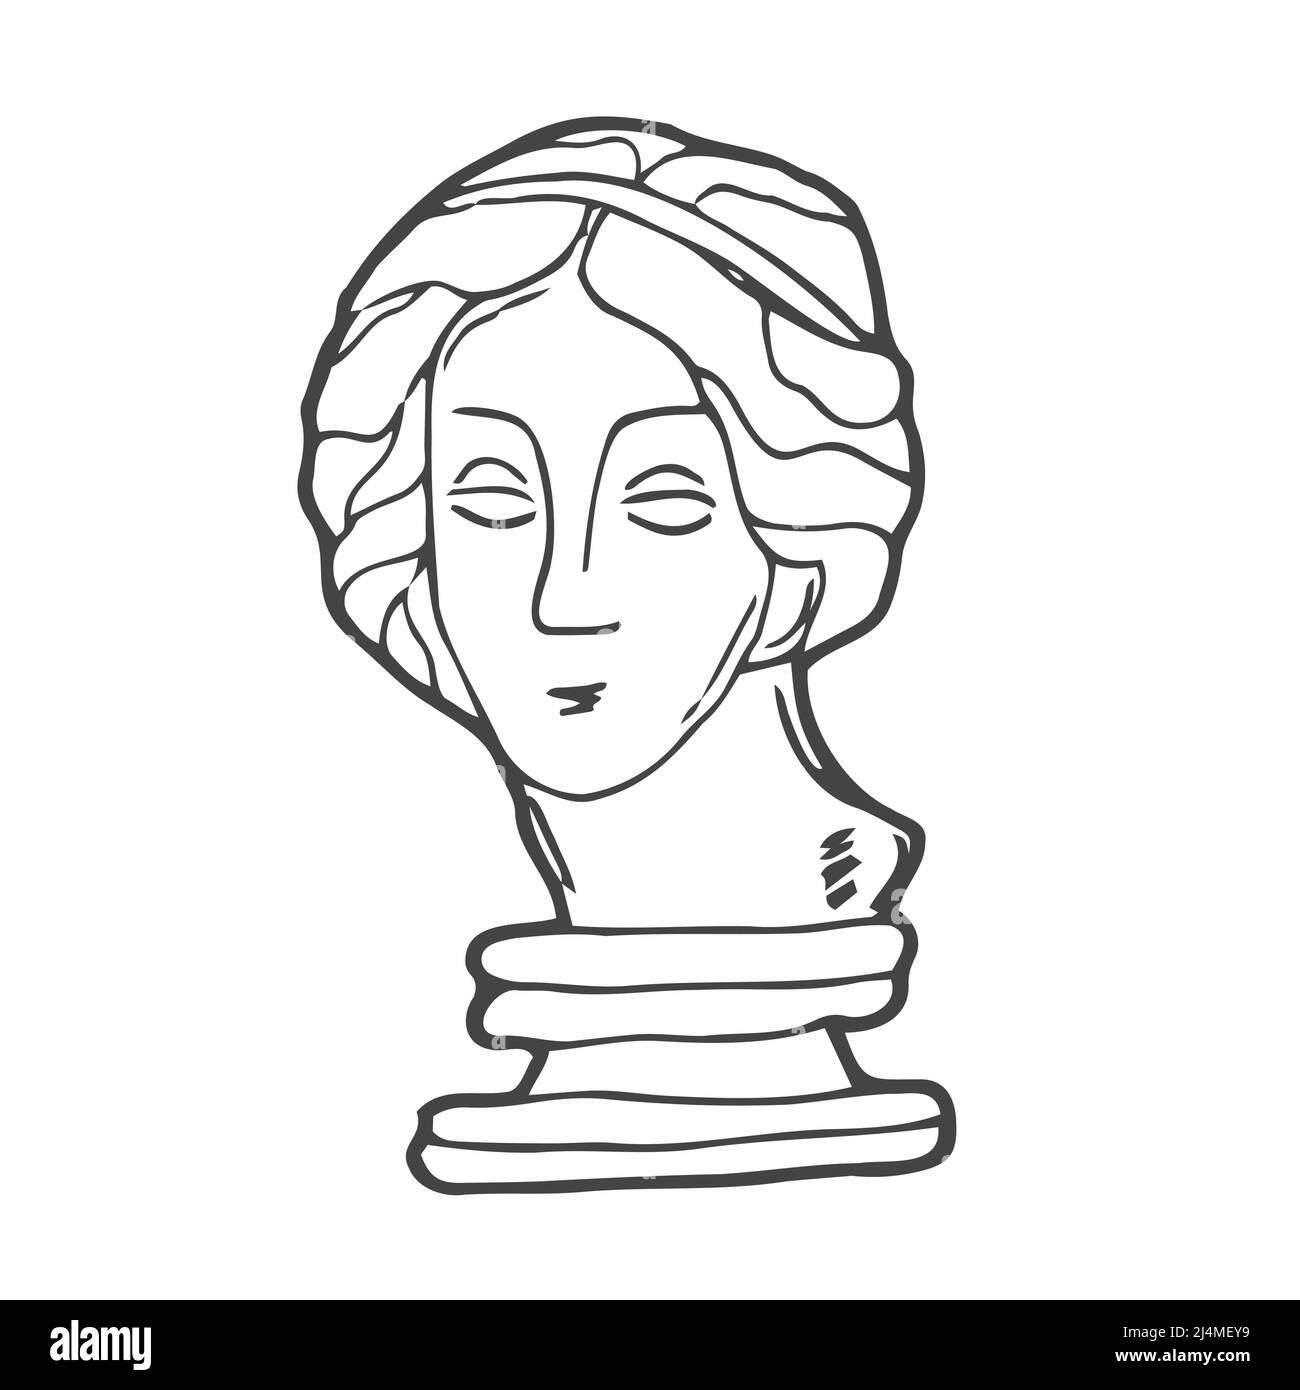 Head of a beautiful ancient Greek woman. Goddess Aphrodite or Venus. Classic female portrait. Hand drawn linear doodle rough sketch. Stock Vector